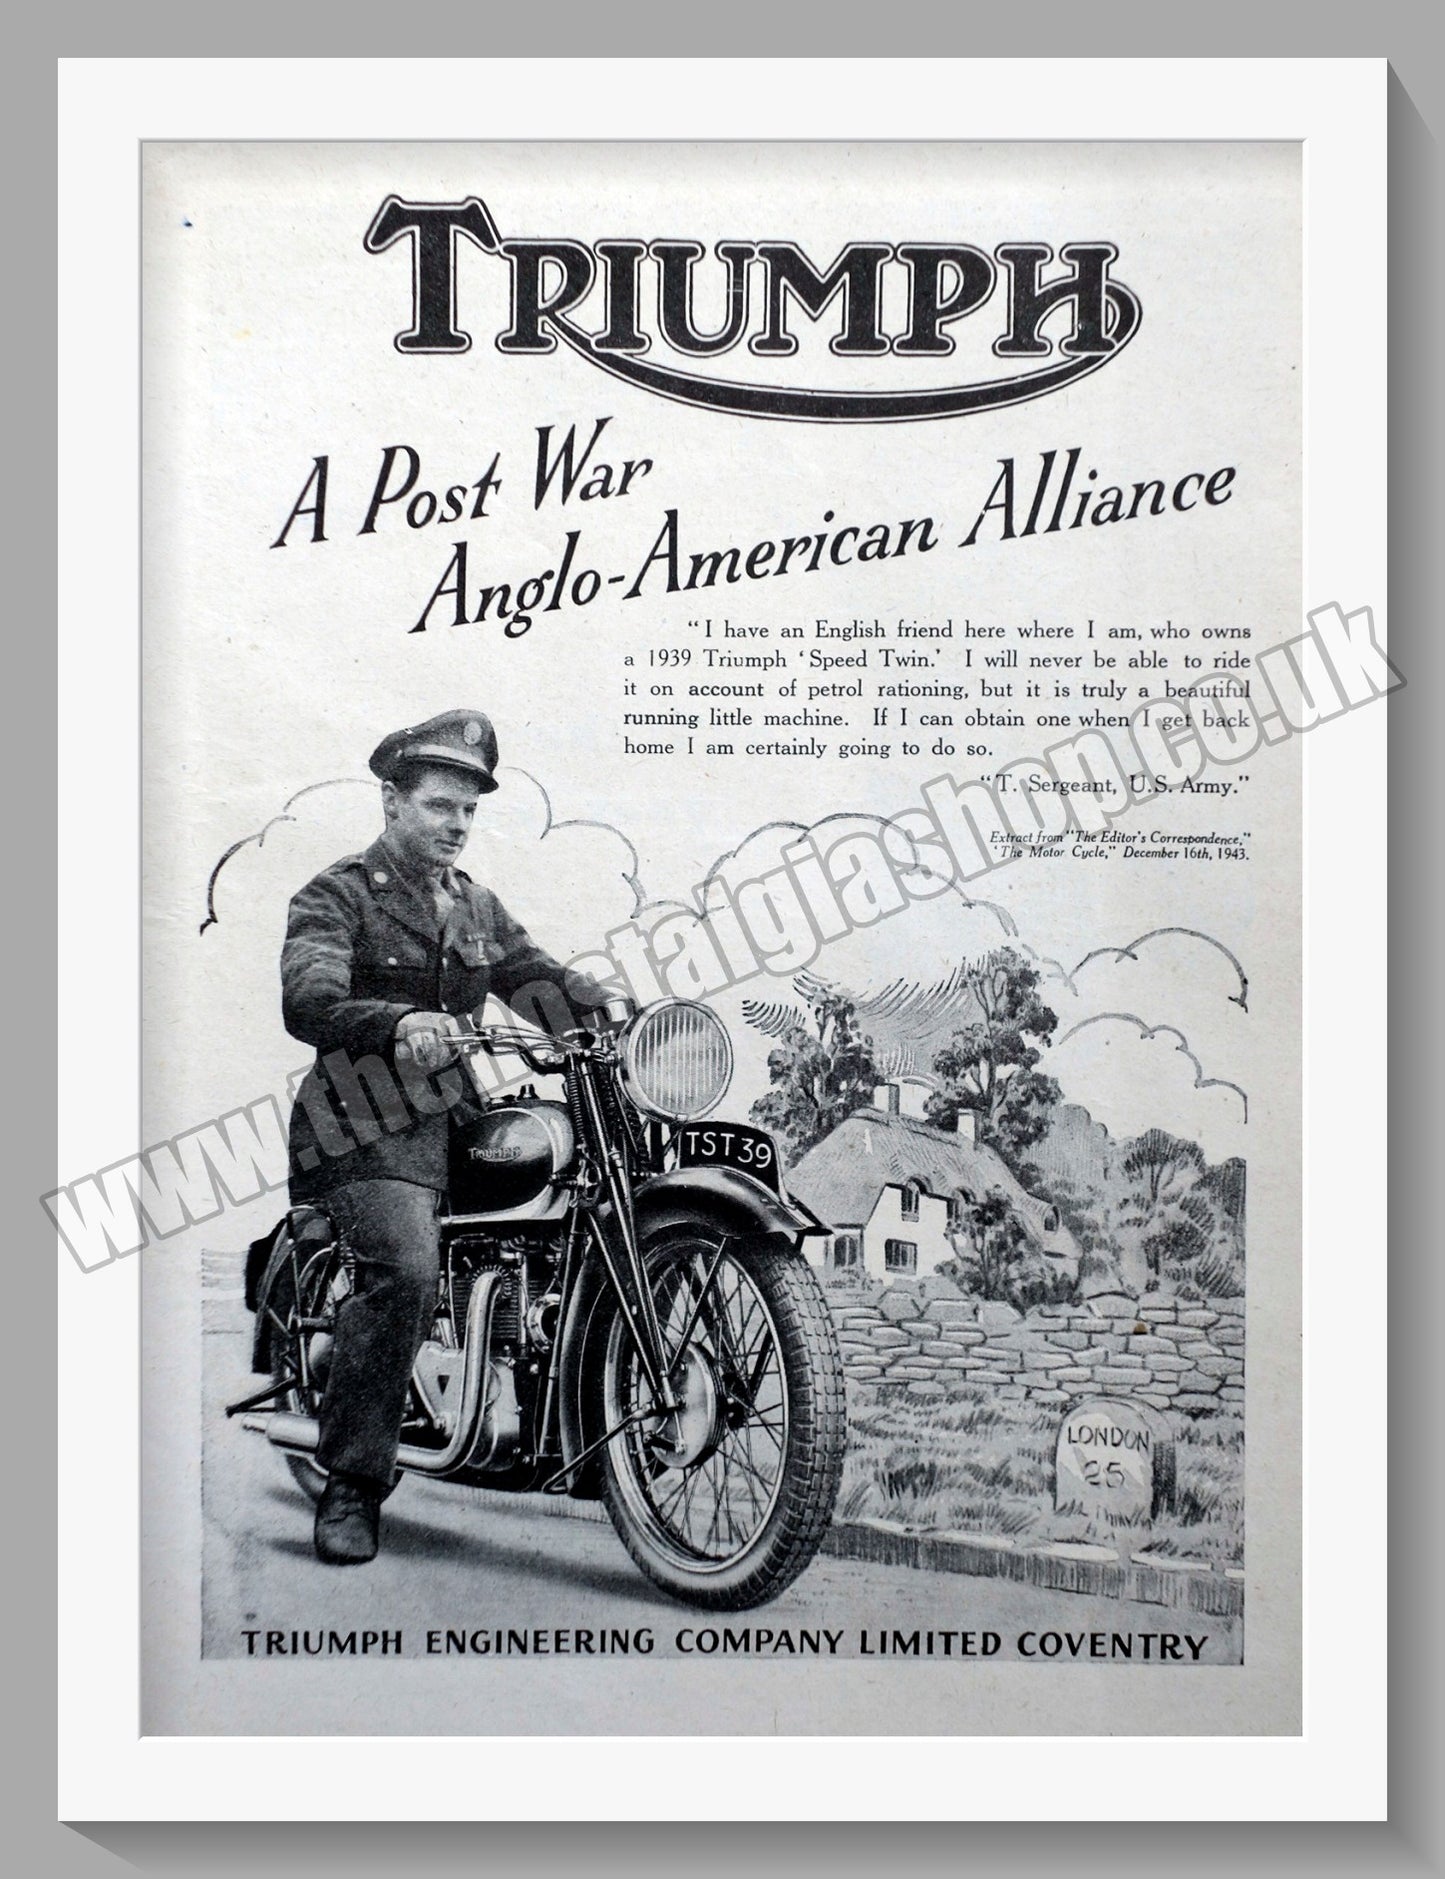 Triumph Motorcycles, Anglo-American Alliance. Original advert 1944 (ref AD57918)